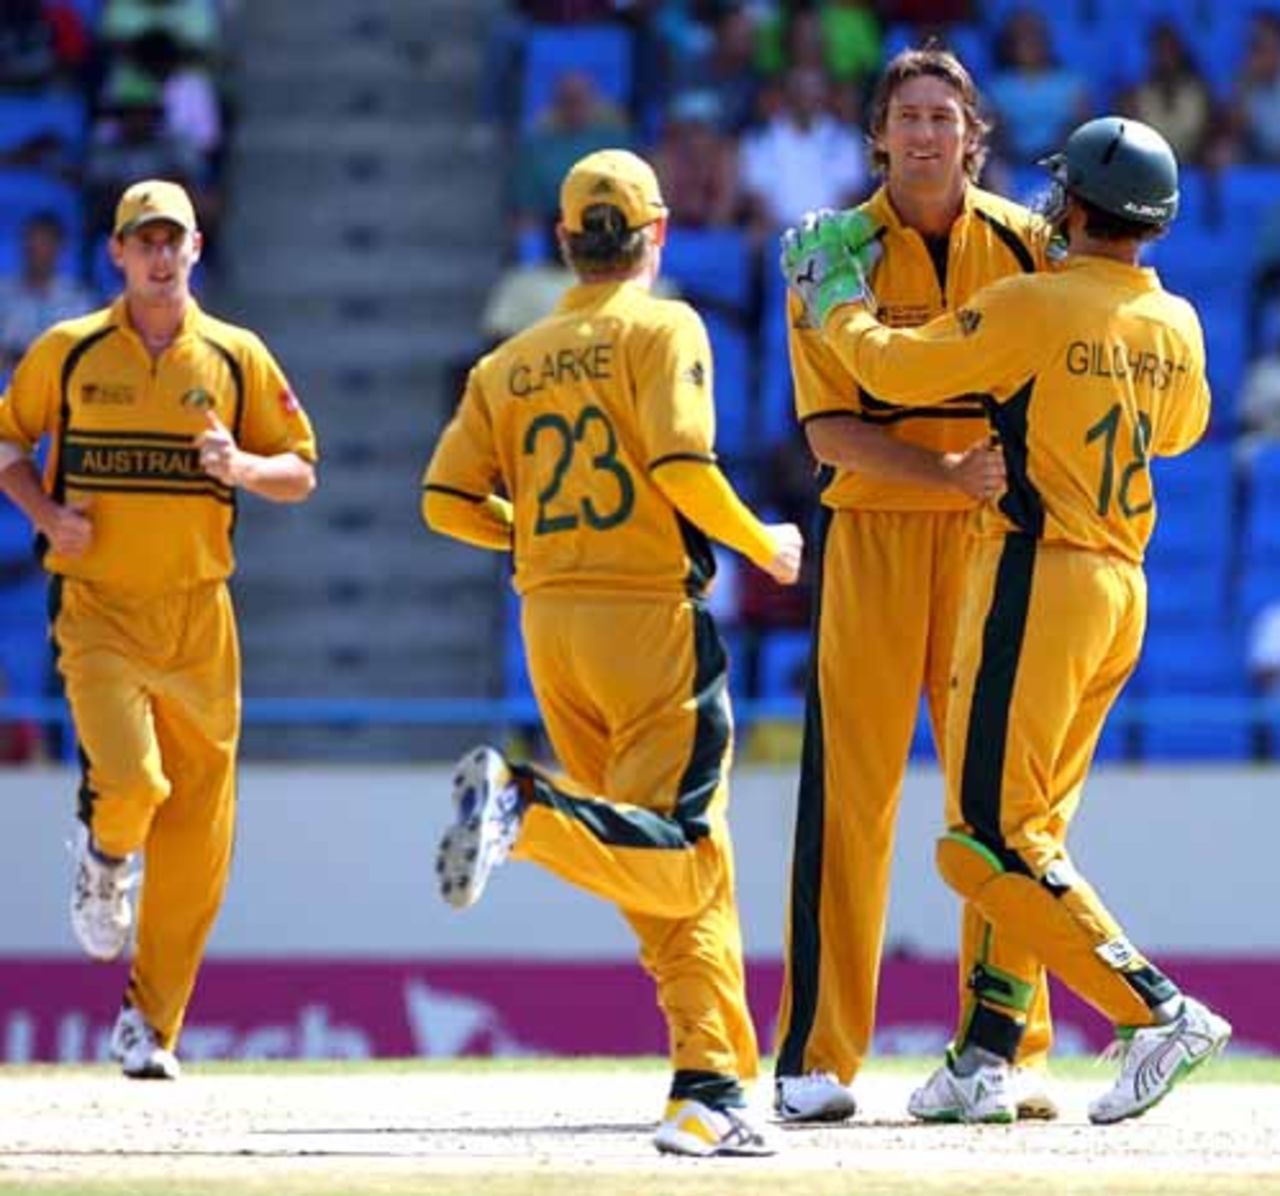 Glenn McGrath is congratulated by his teammates on passing Wasim Akram's World Cup record of 54 wickets, Australia v Bangladesh, Super Eights, Antigua, March 31, 2007